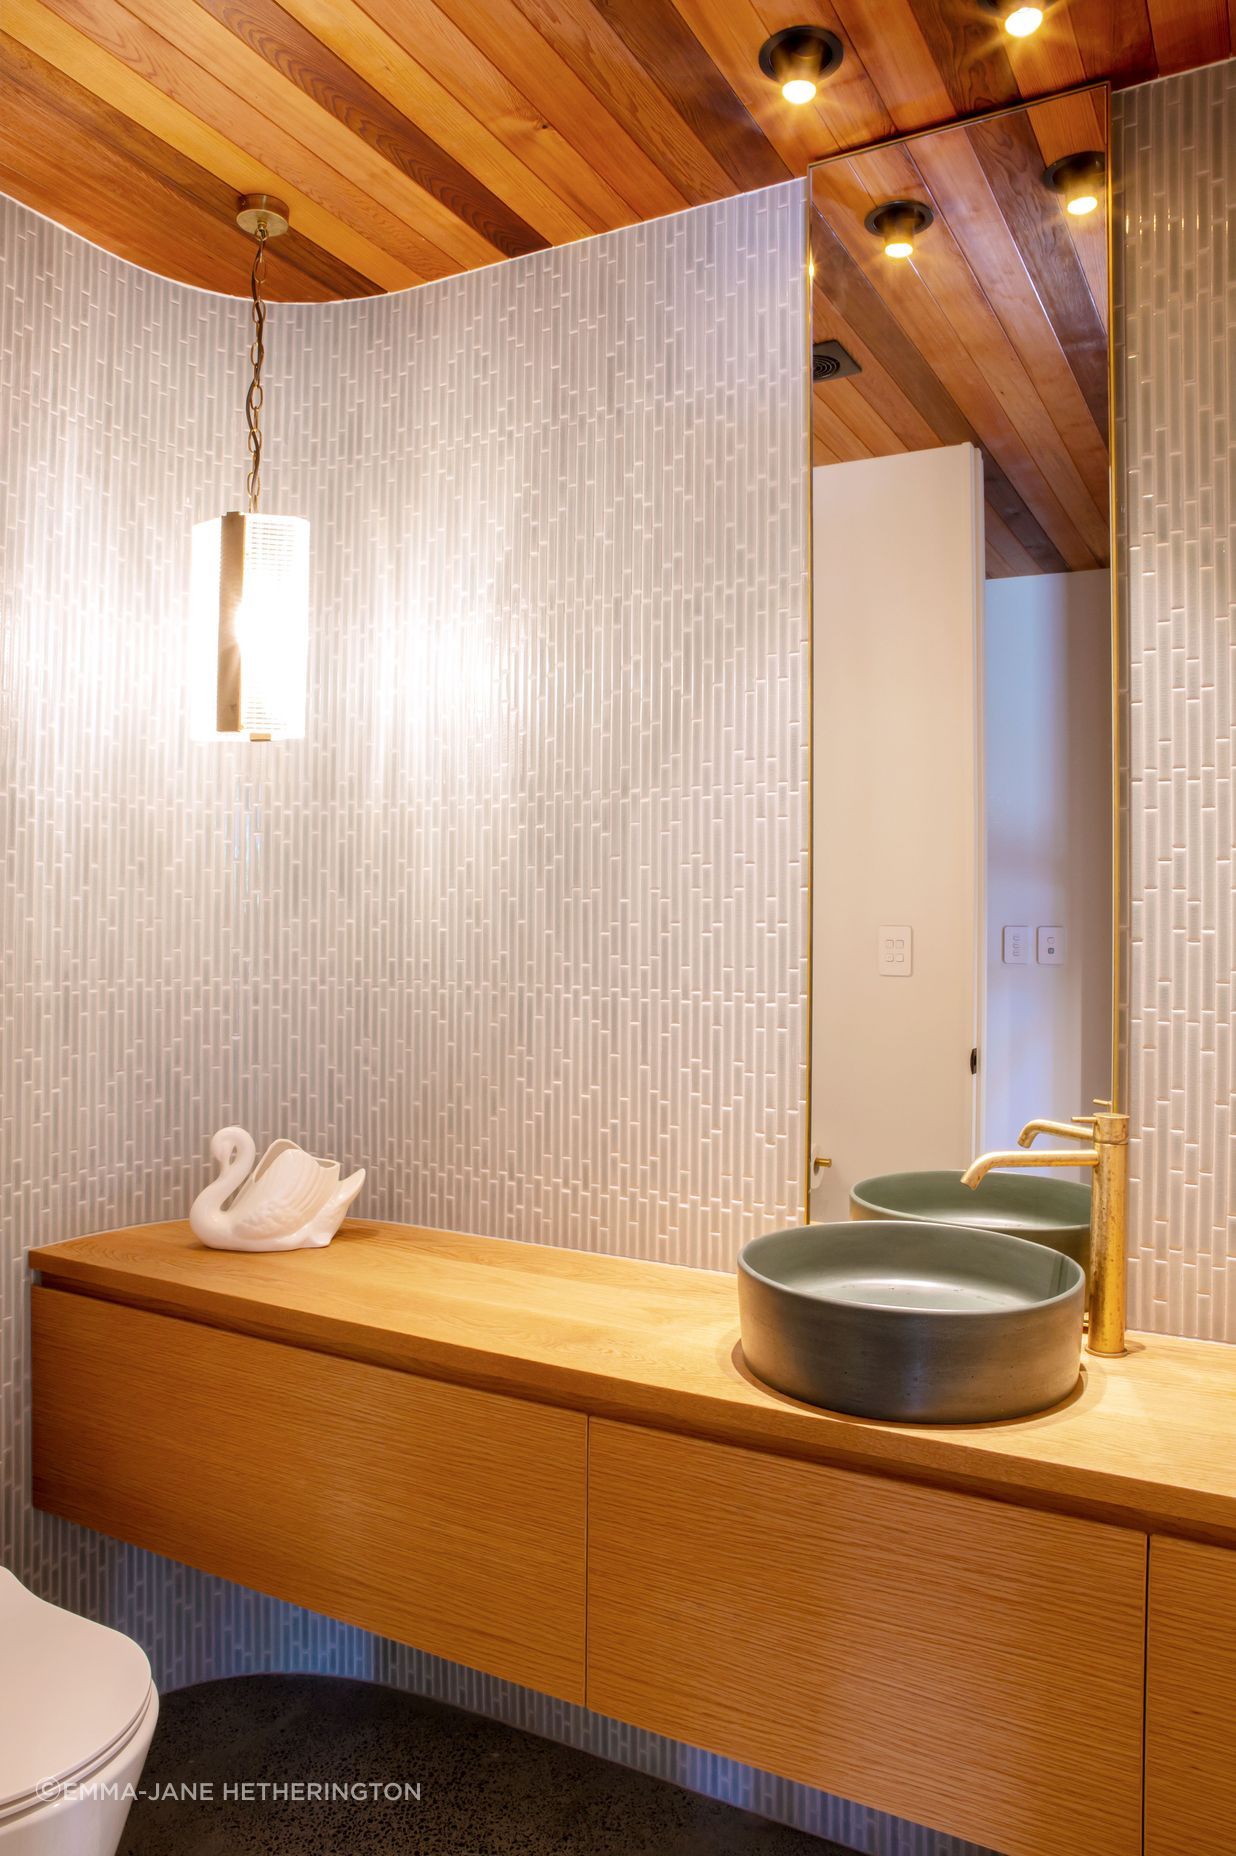 The powder room hidden in the foyer, echoing the curved motif outside the house.